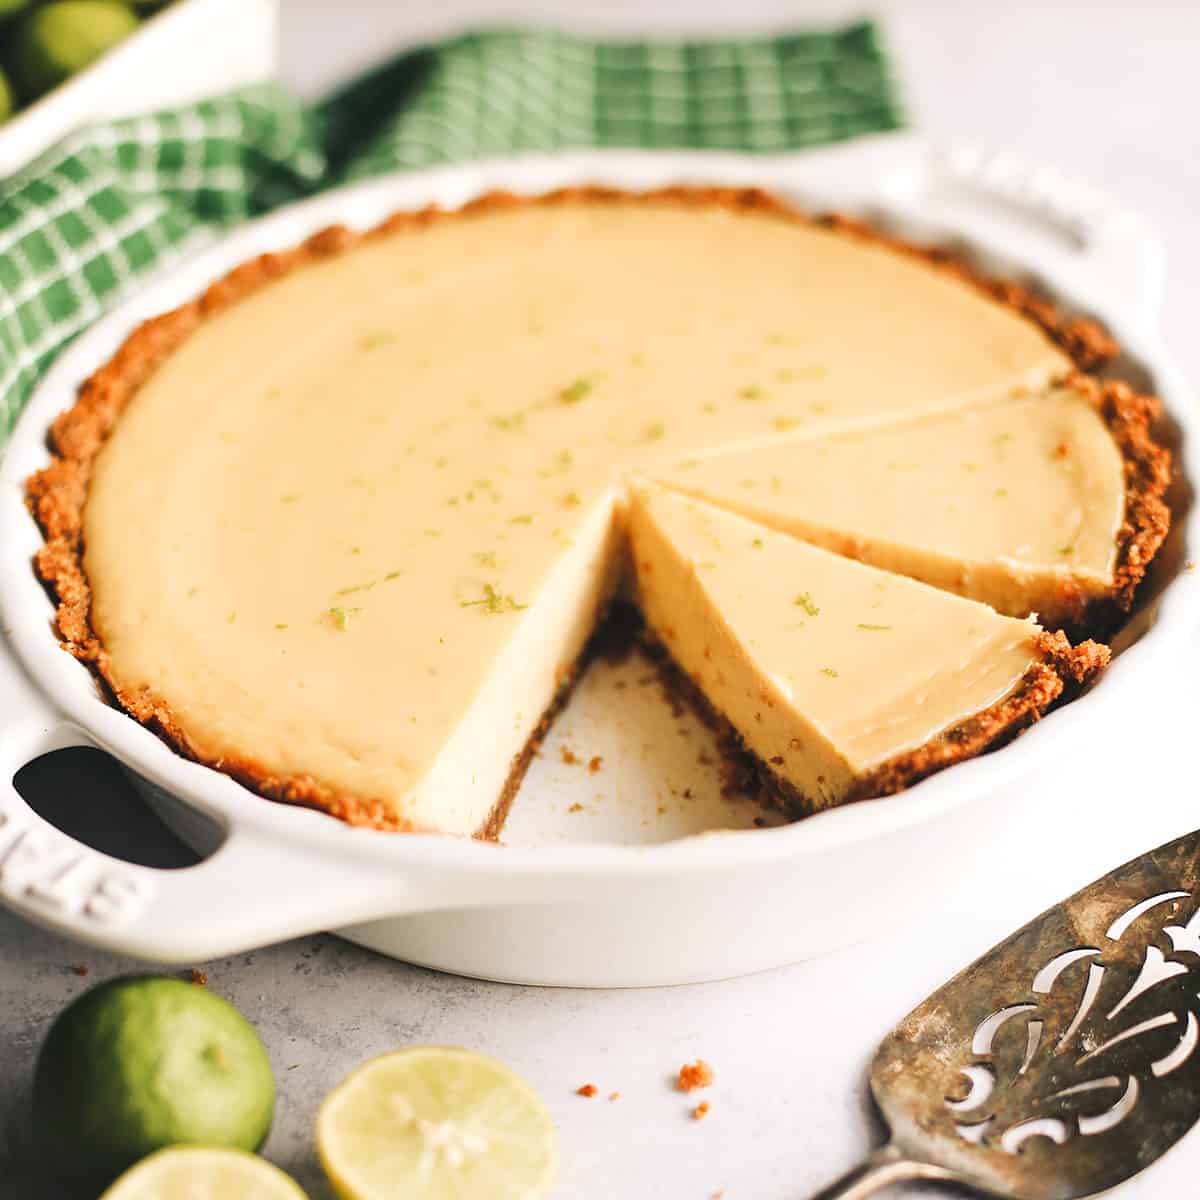 Key Lime Pie in a pie dish with 2 slices cut out of it